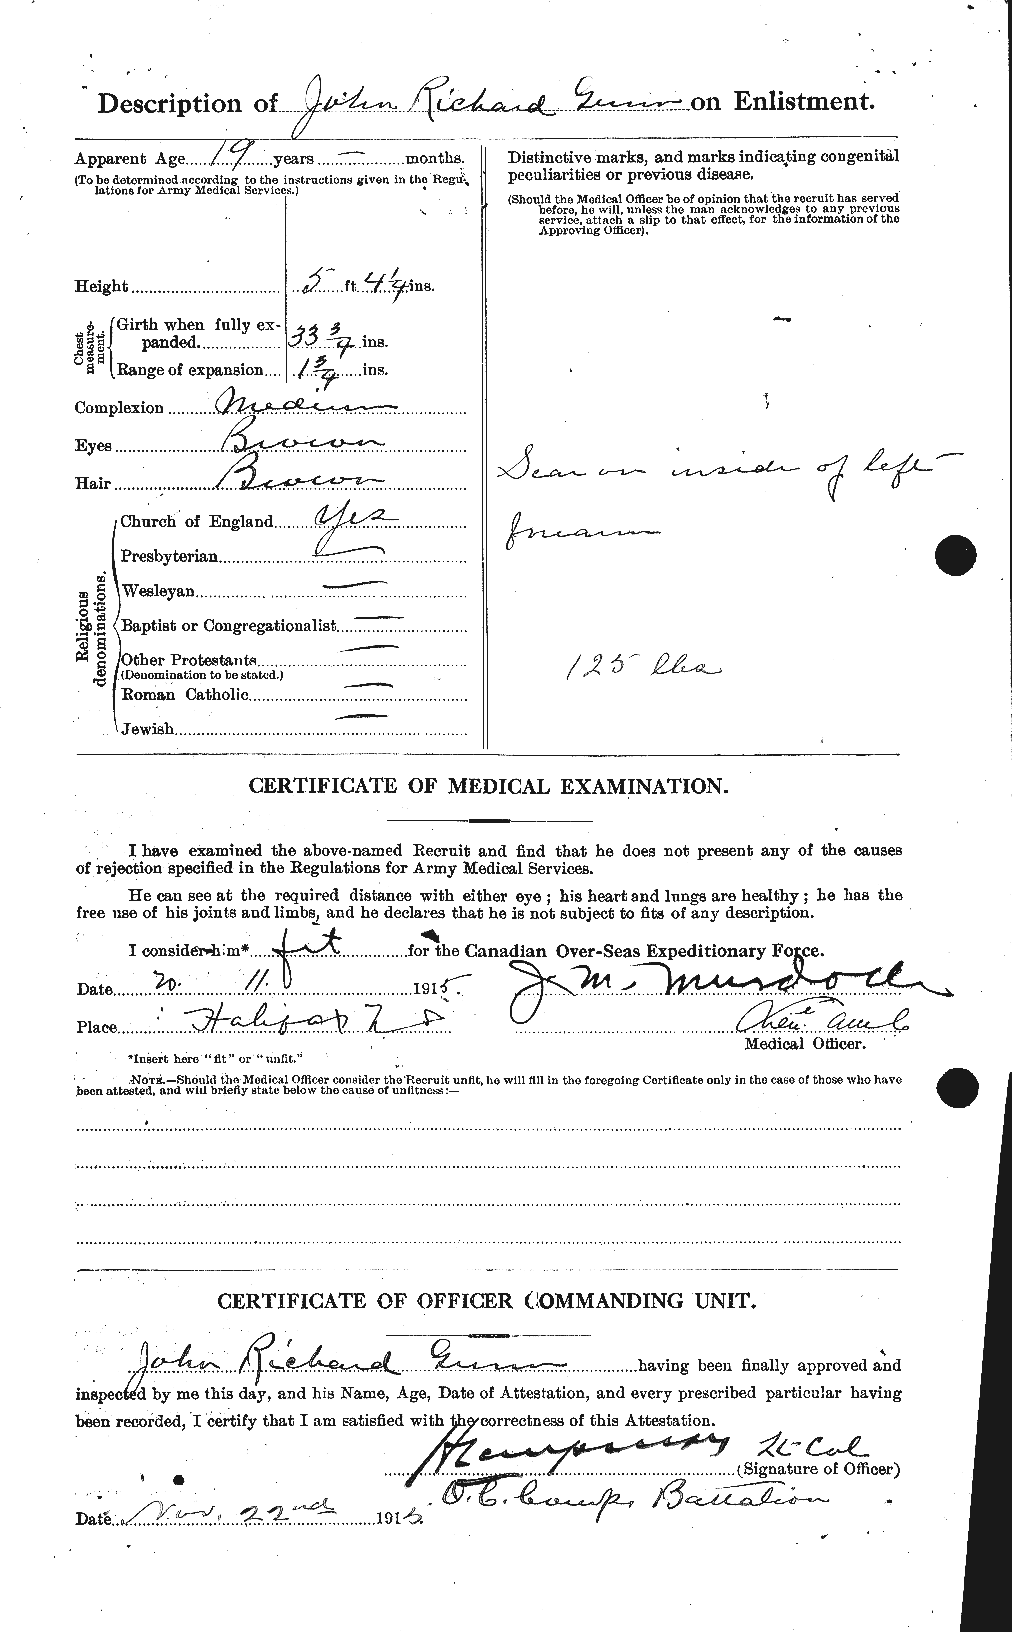 Personnel Records of the First World War - CEF 369300b